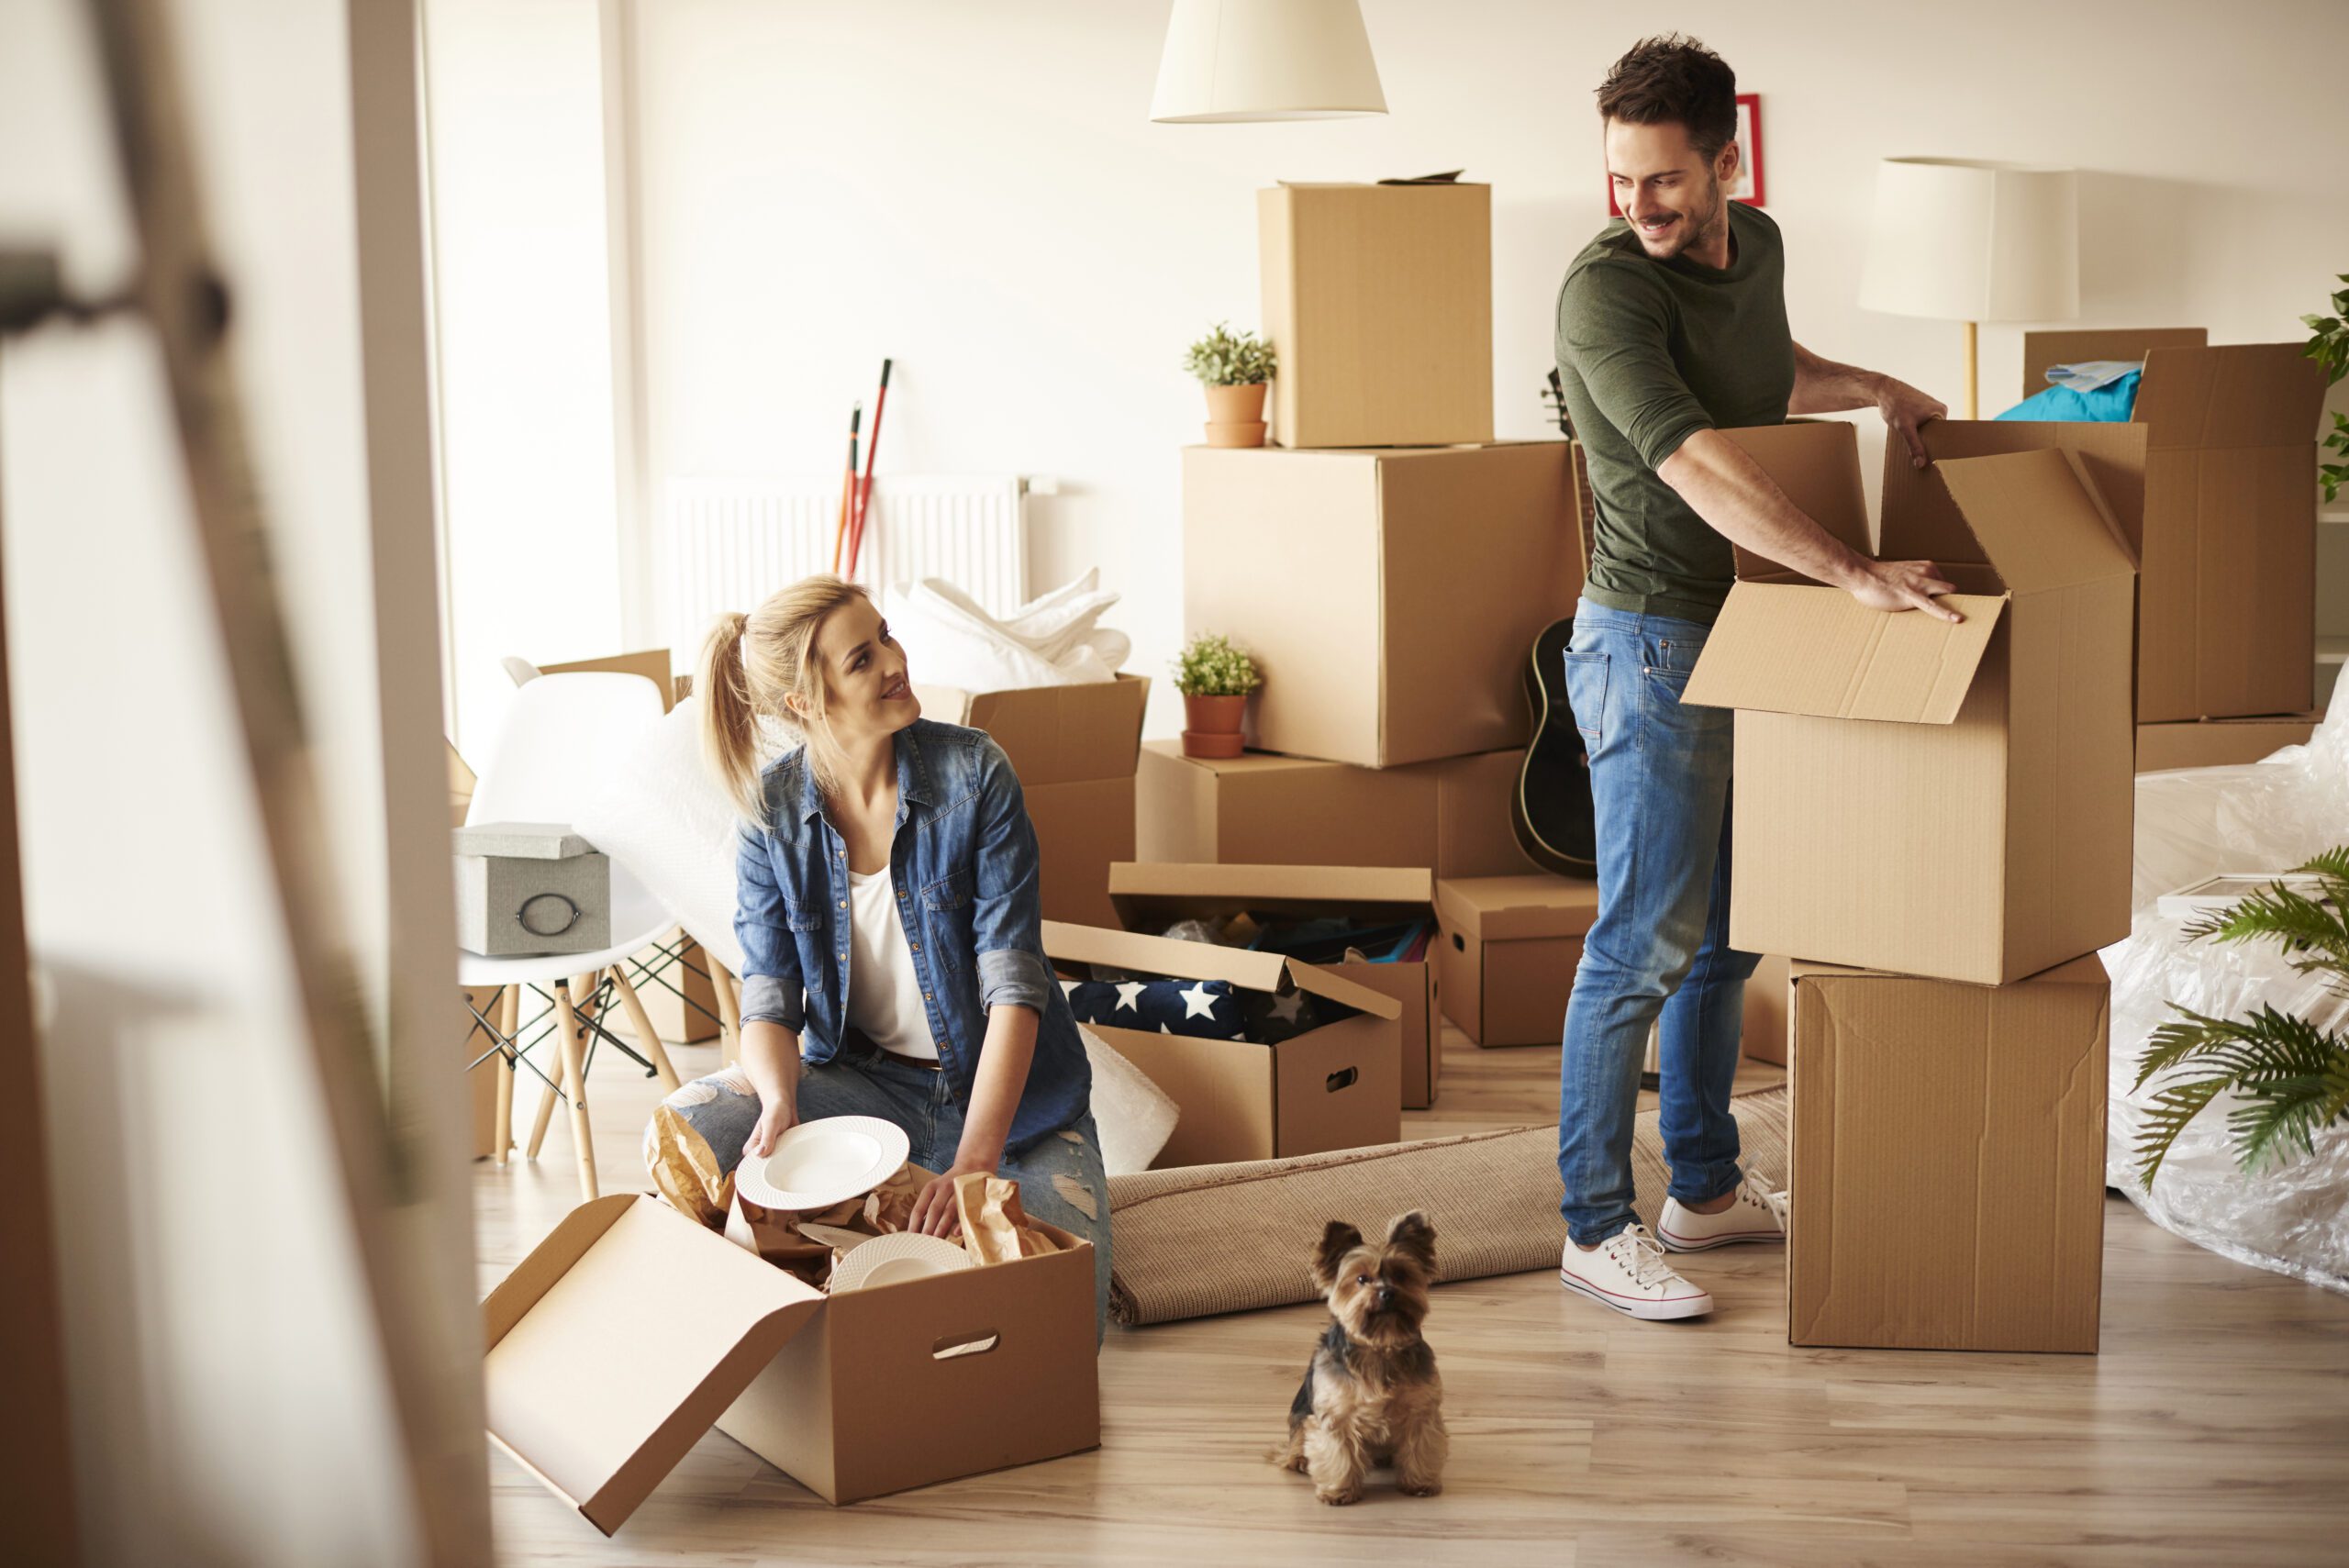 What happens to your mortgage when you move?